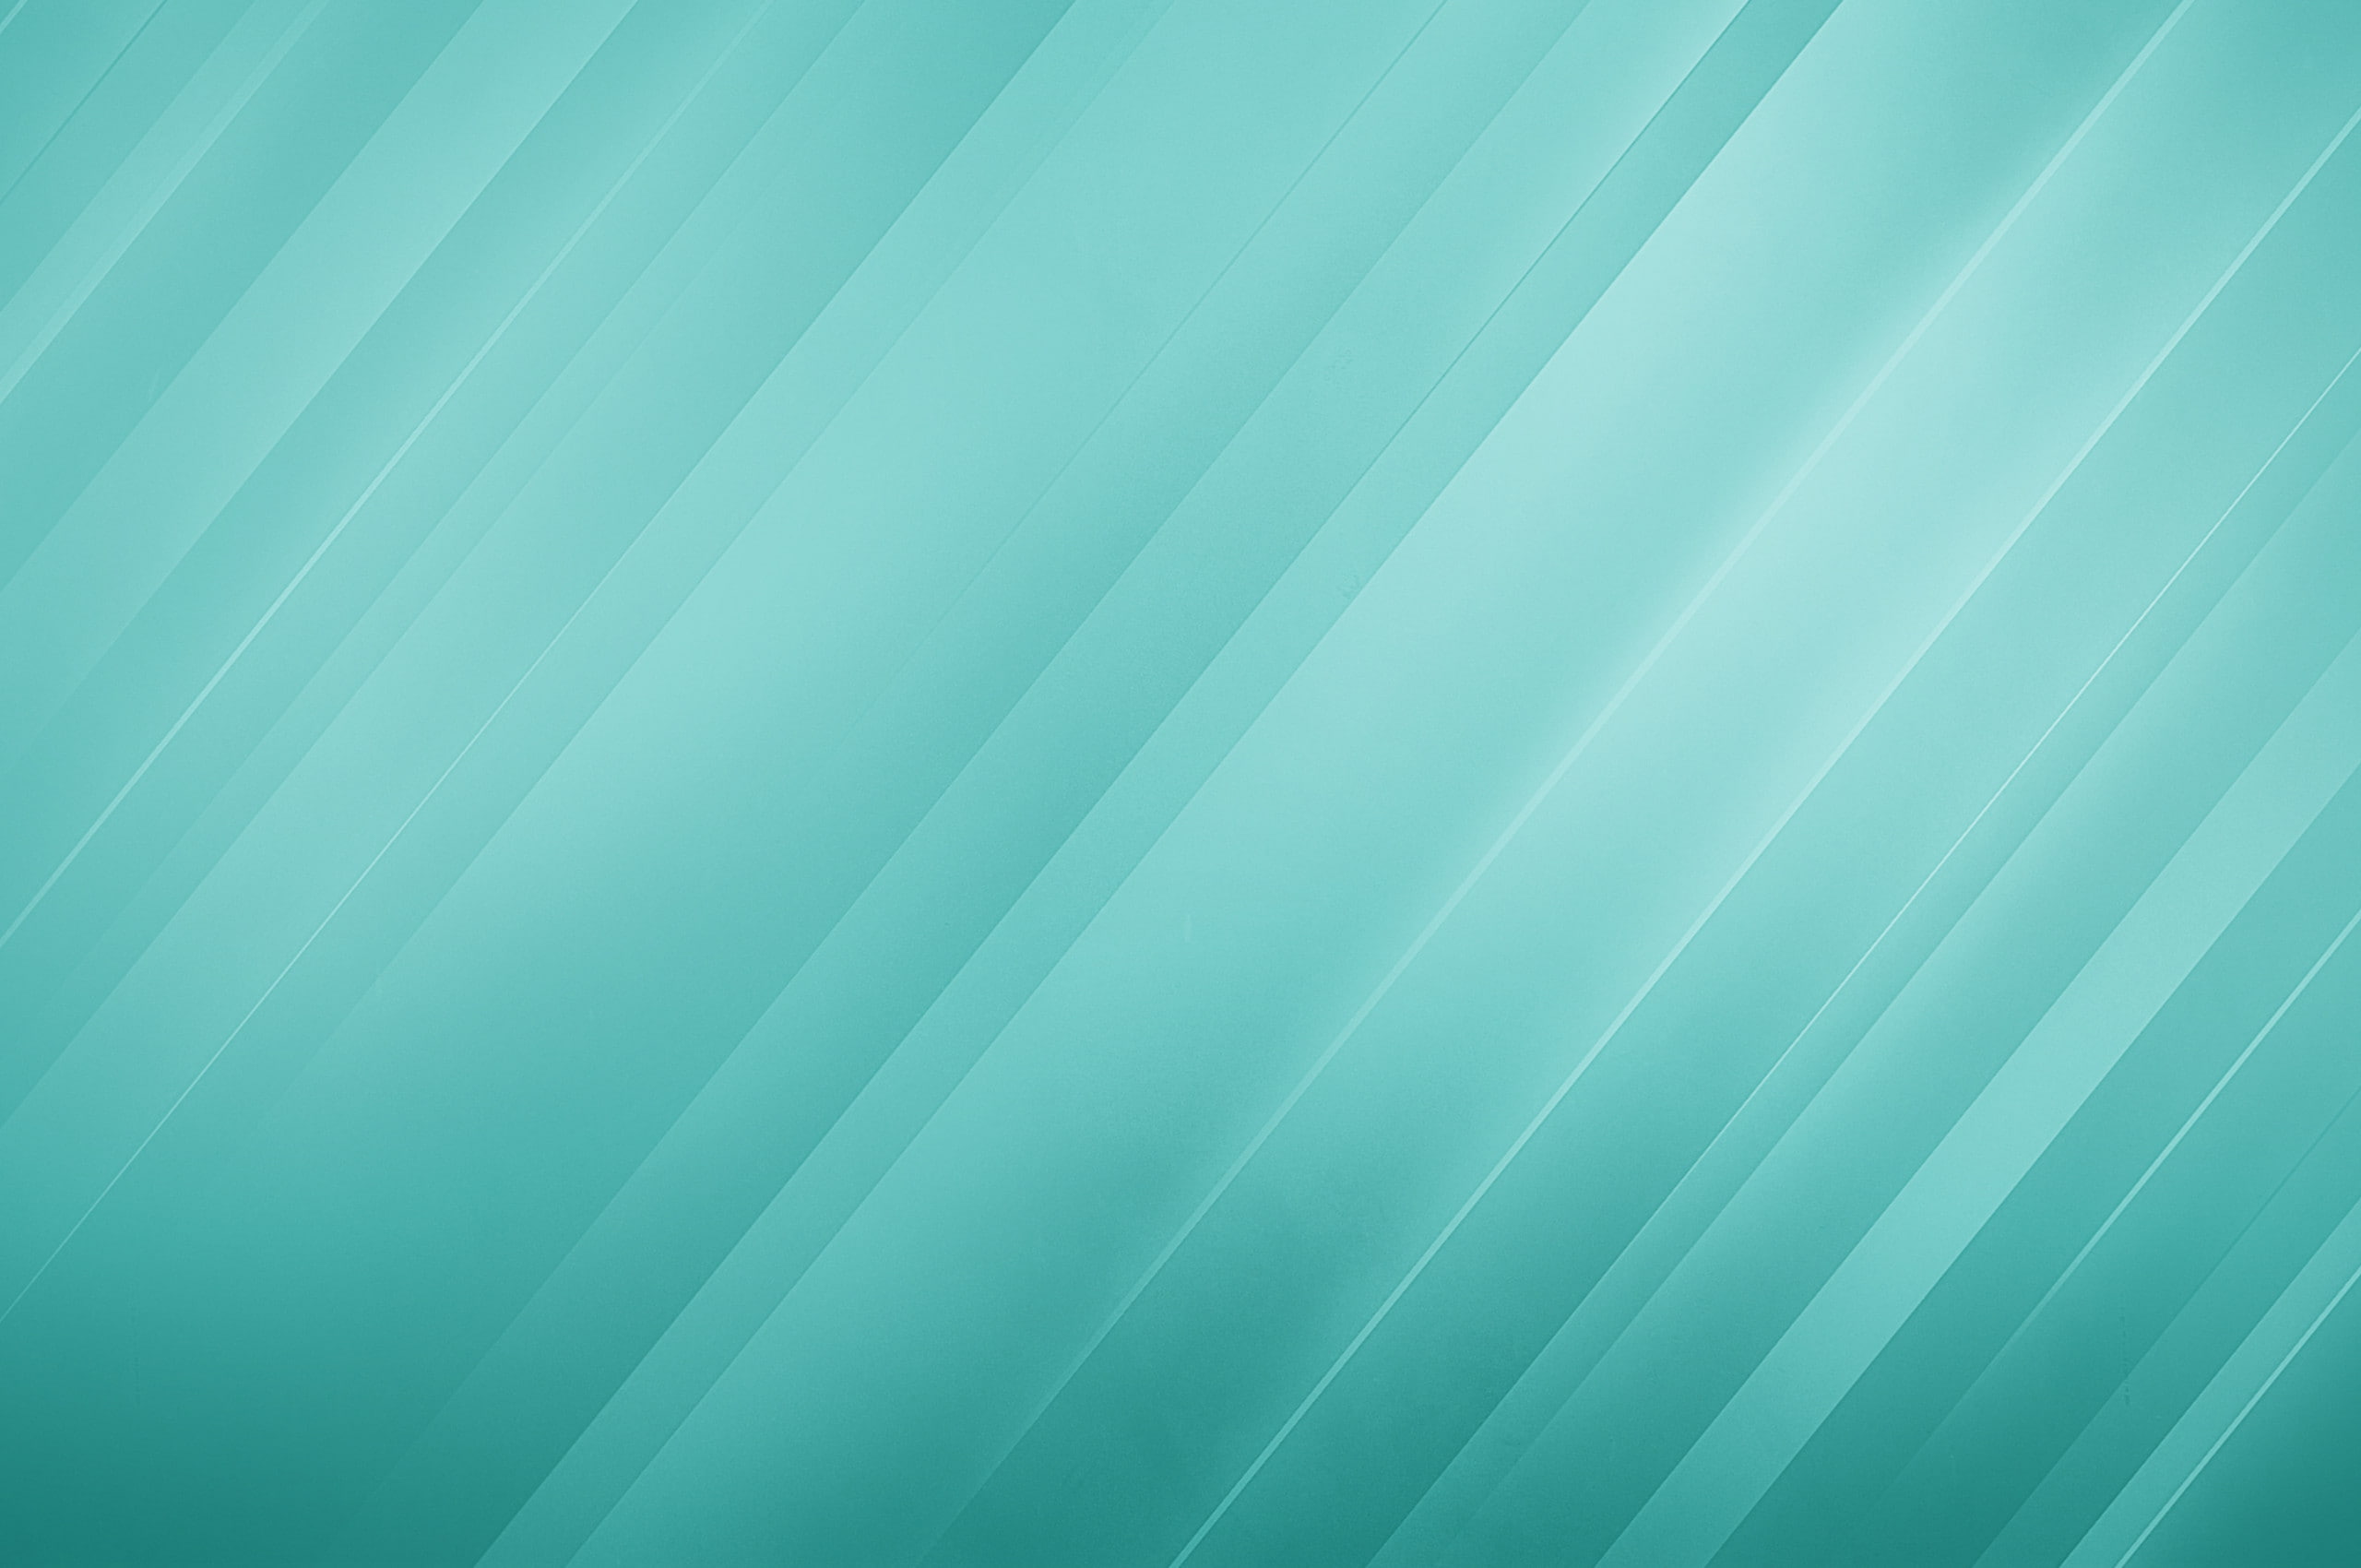 Chrome OS, Teal, Stock, Fade, Stripes, Turquoise, green color